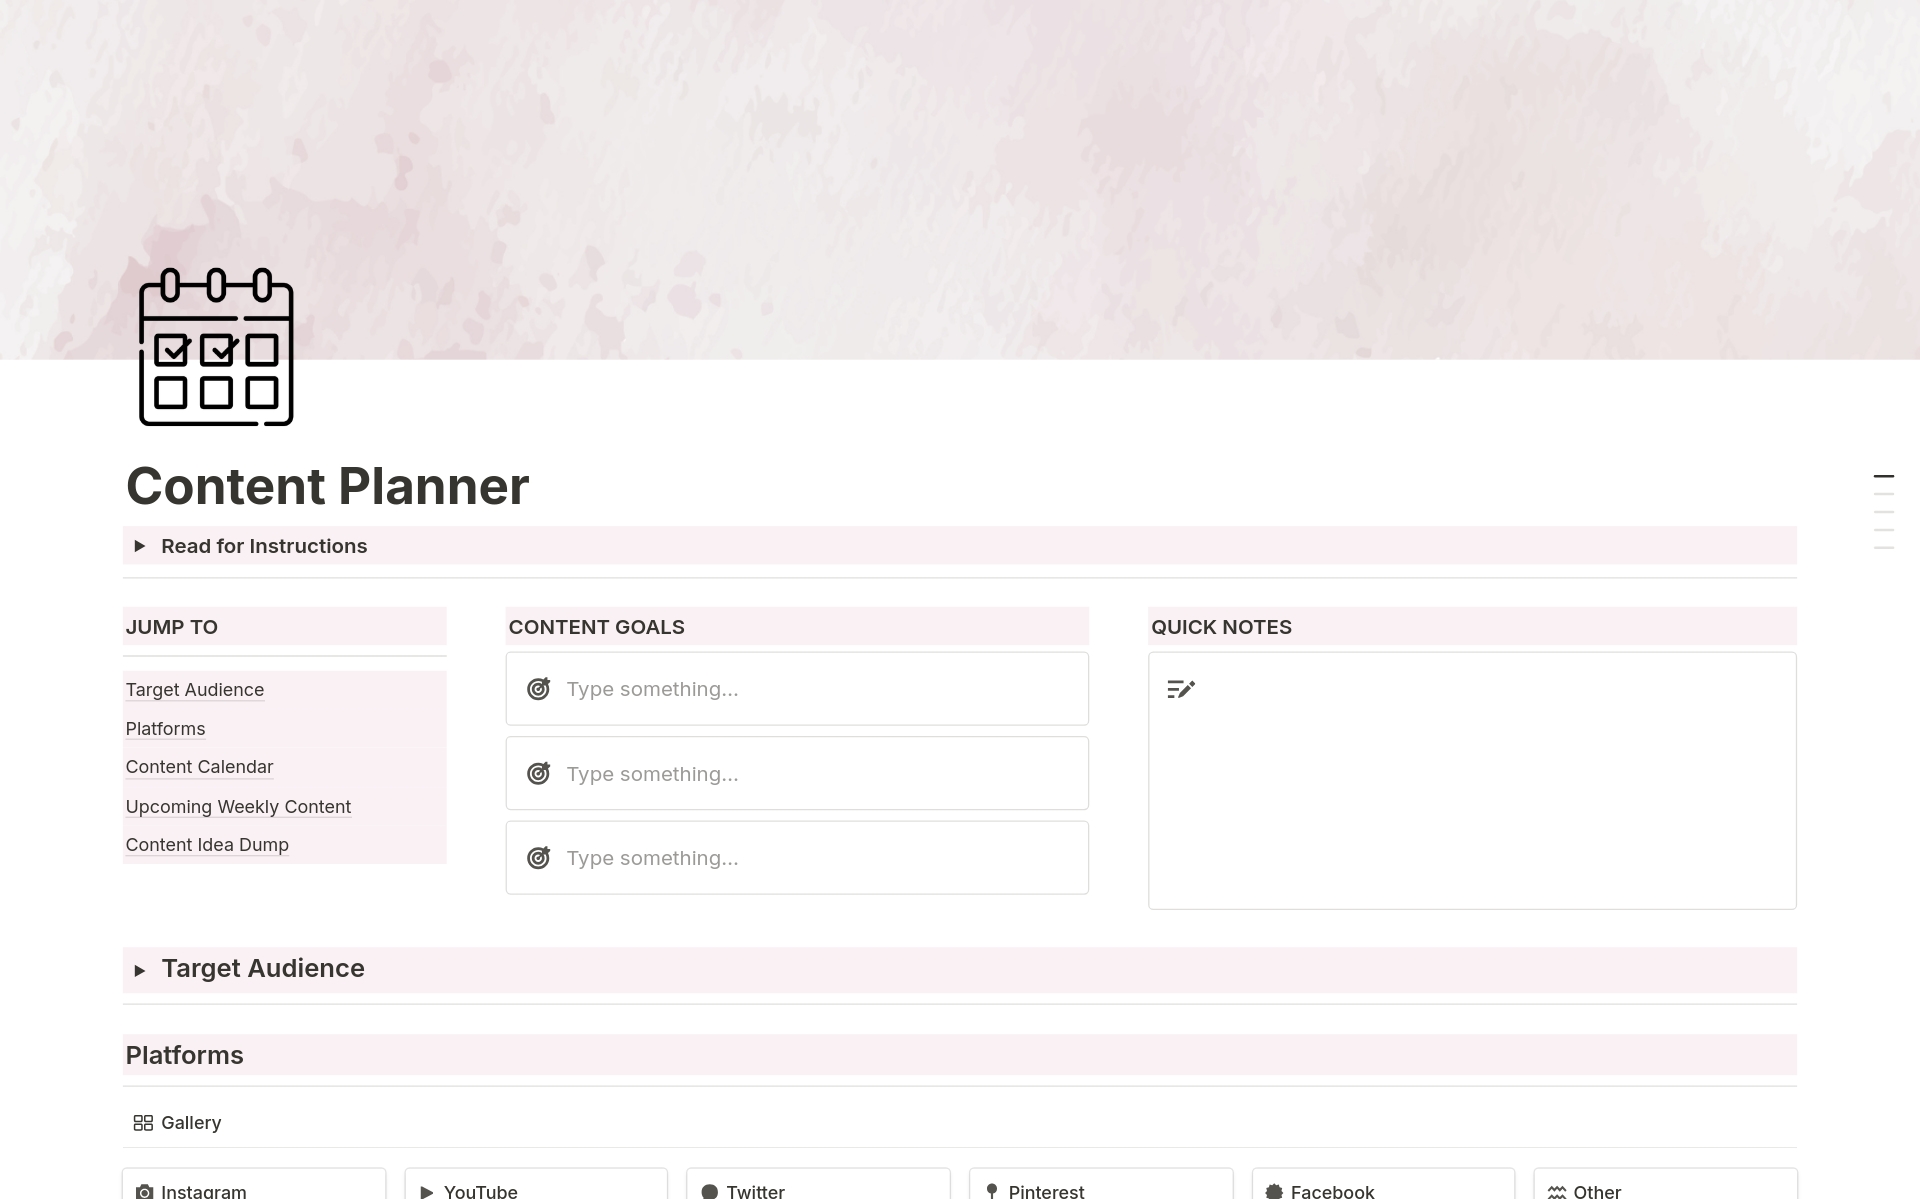 Easily plan all of your content in Notion! The Content Planner is a valuable tool for bloggers, digital content creators and social media managers. Stay organized and inspired with this comprehensive planner - brainstorm ideas, explore your audience and outline your posts. 